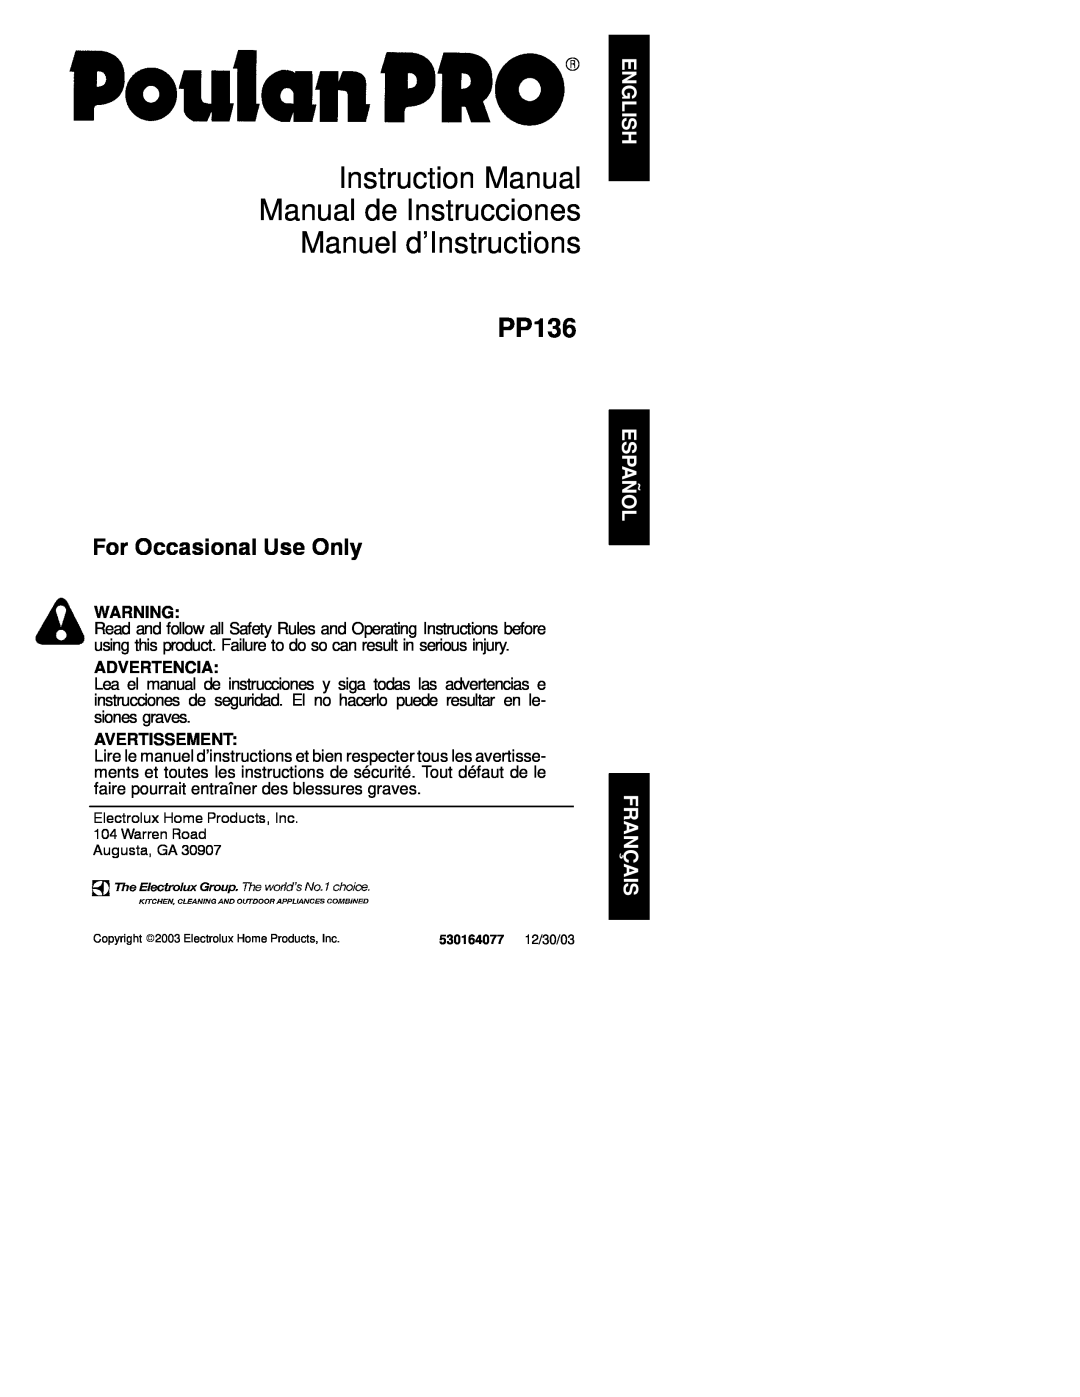 Poulan 530164077 instruction manual Advertencia, Avertissement, Manuel d’Instructions, PP136, For Occasional Use Only 